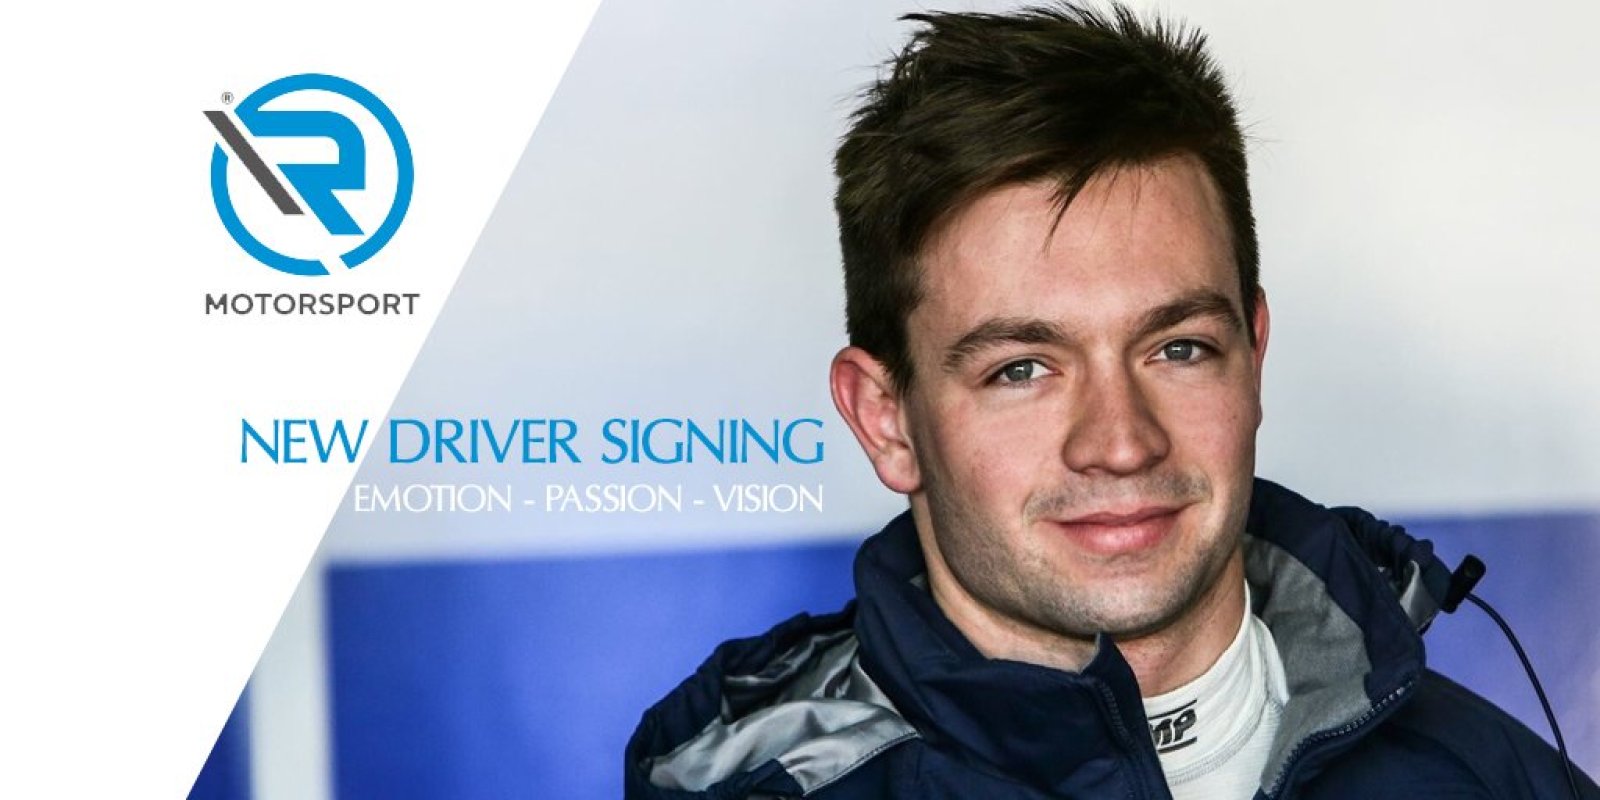 R-Motorsport signs Matthieu Vaxiviere for the Blancpain GT Series Endurance Cup 2018